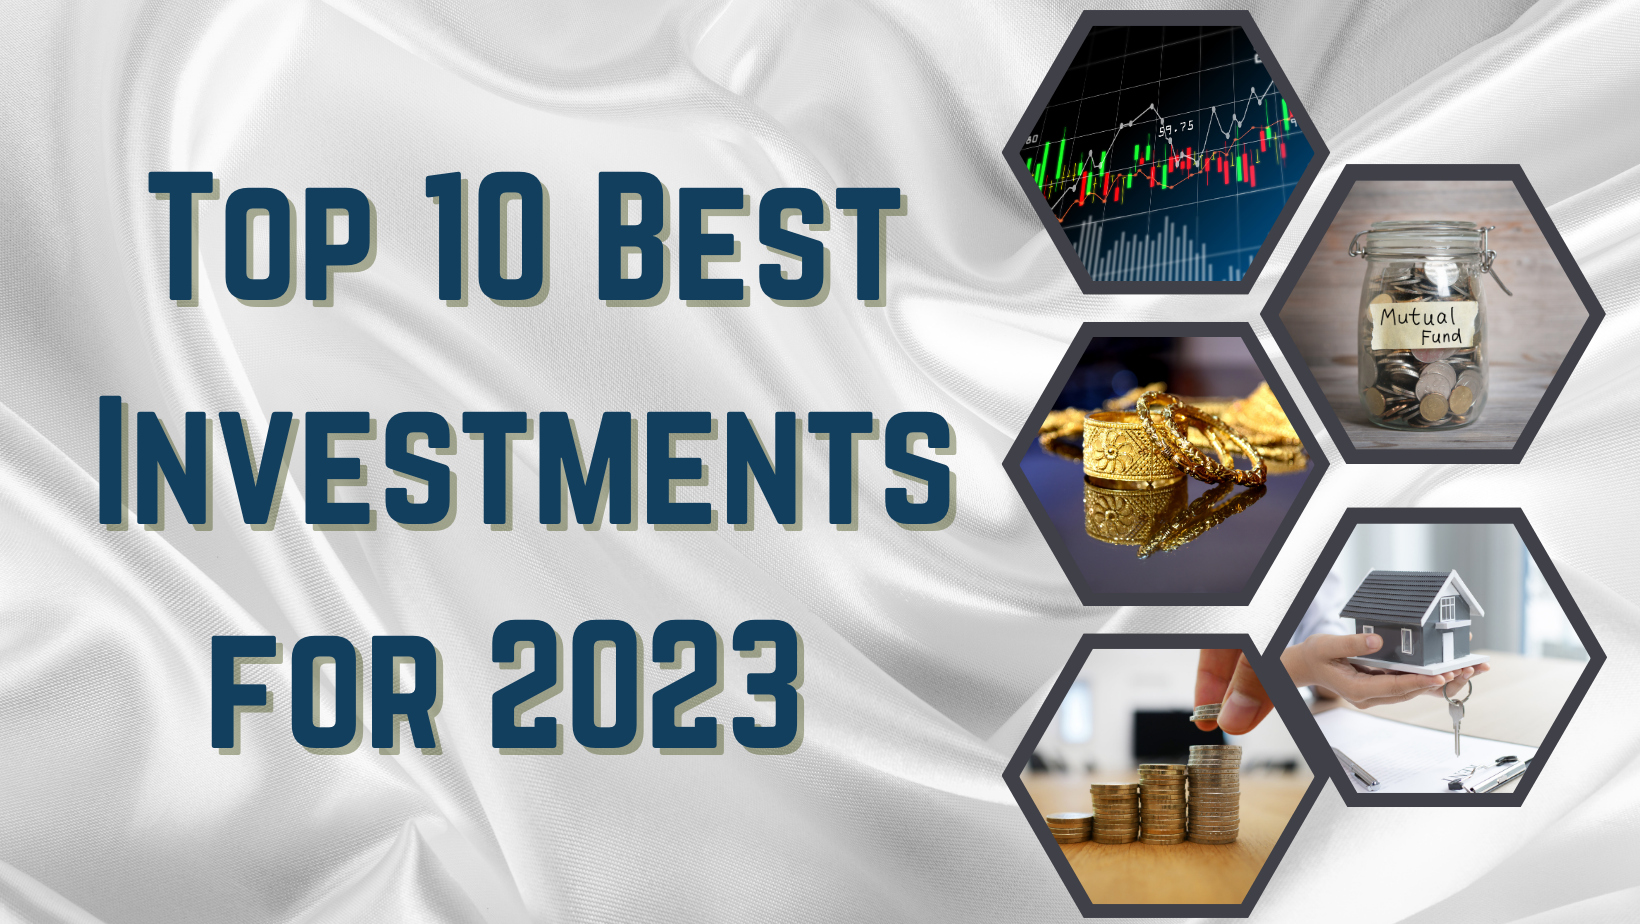 Top 10 Best Investments for 2023